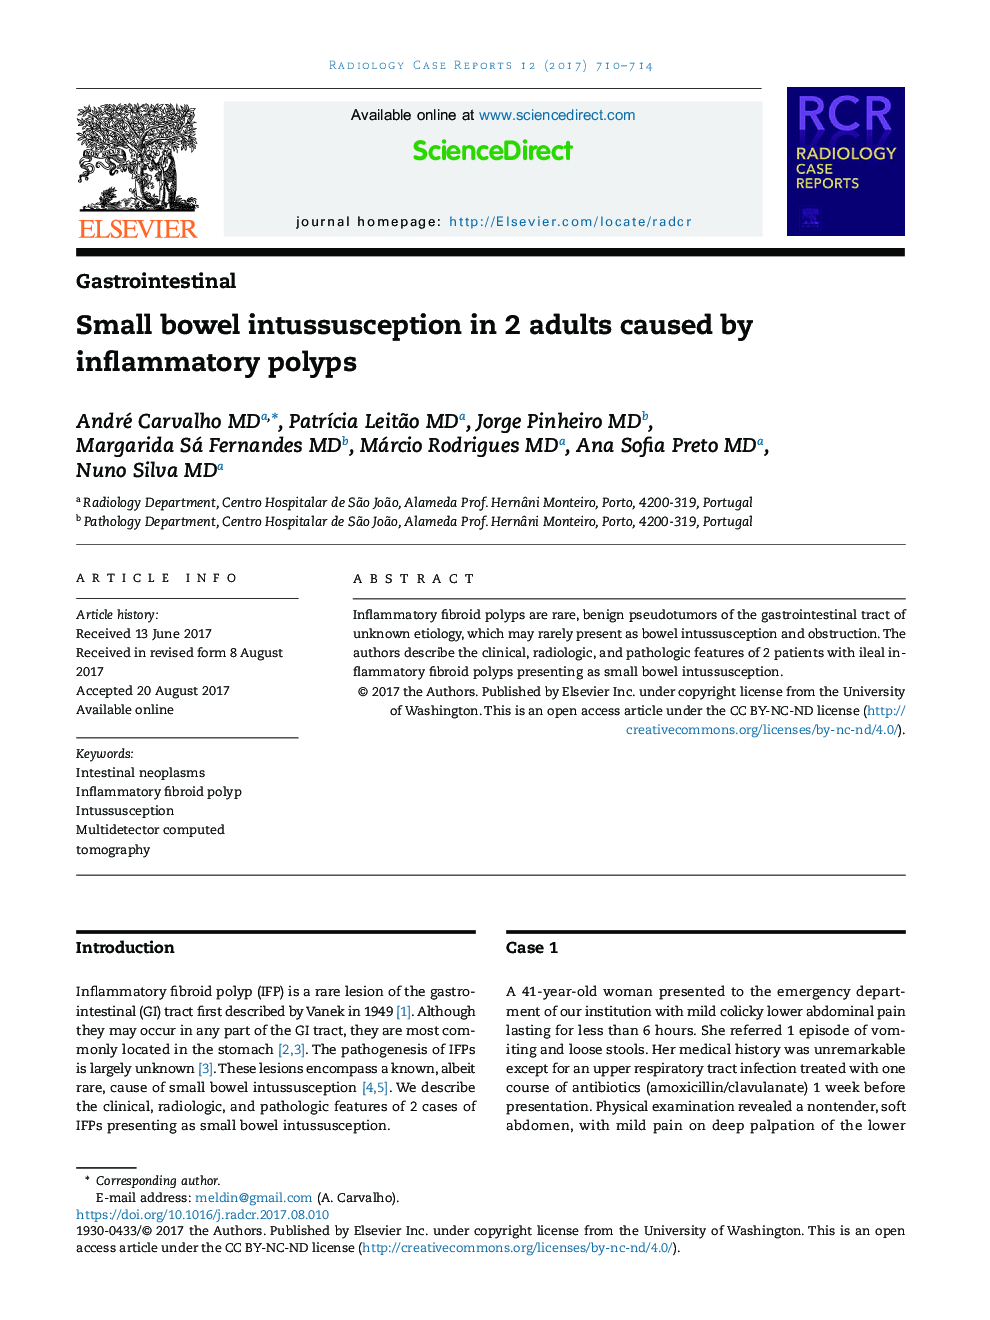 Small bowel intussusception in 2 adults caused by inflammatory polyps